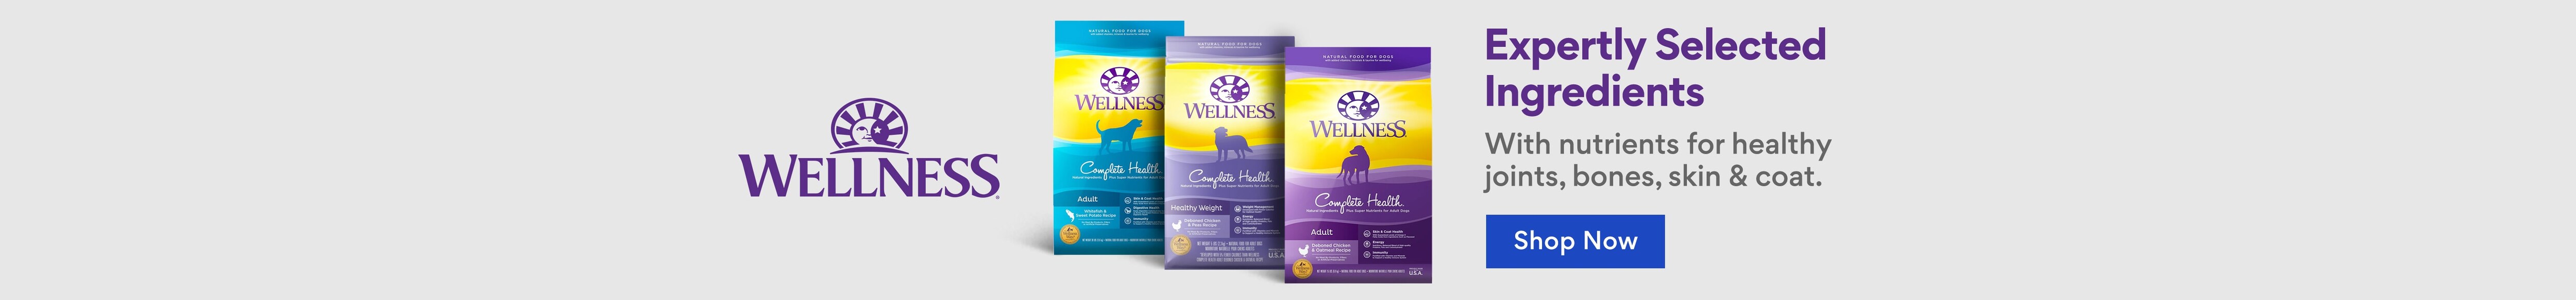 Wellness. Expertly selected ingredients. With nutrients for healthy joints, bones, skin & coat.